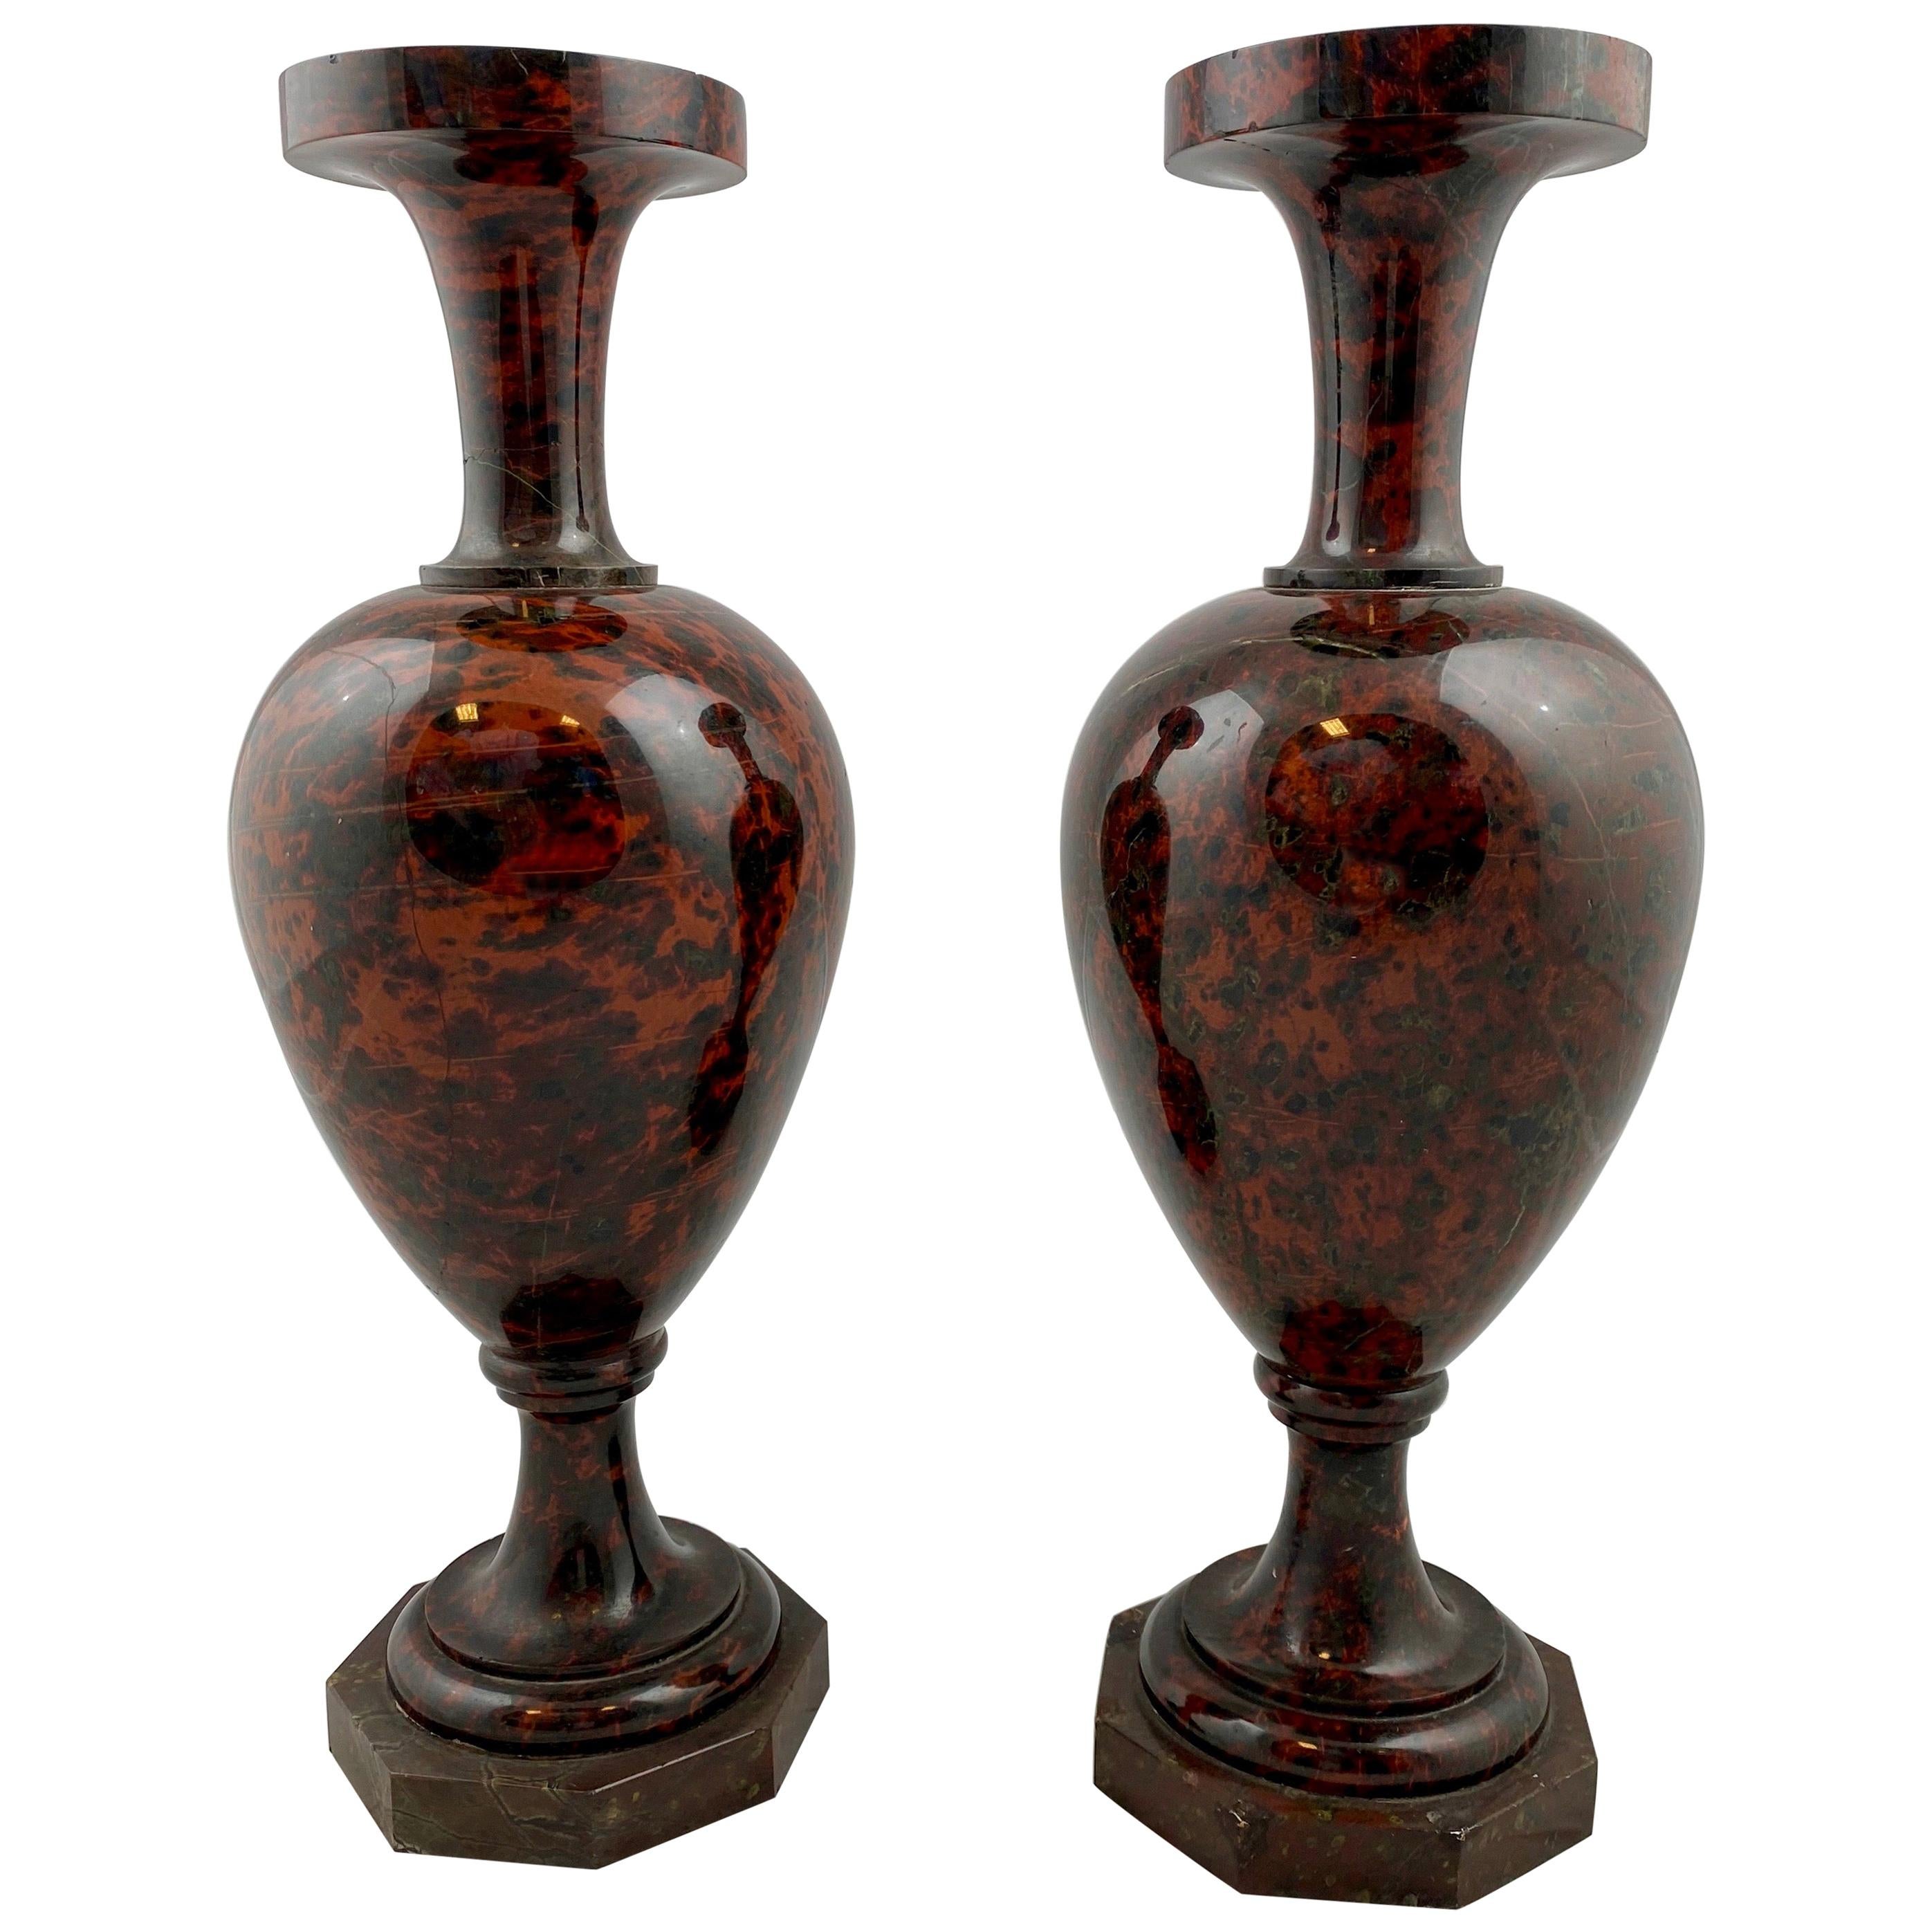 Pair of Hardstone Vases, Early 19th Century